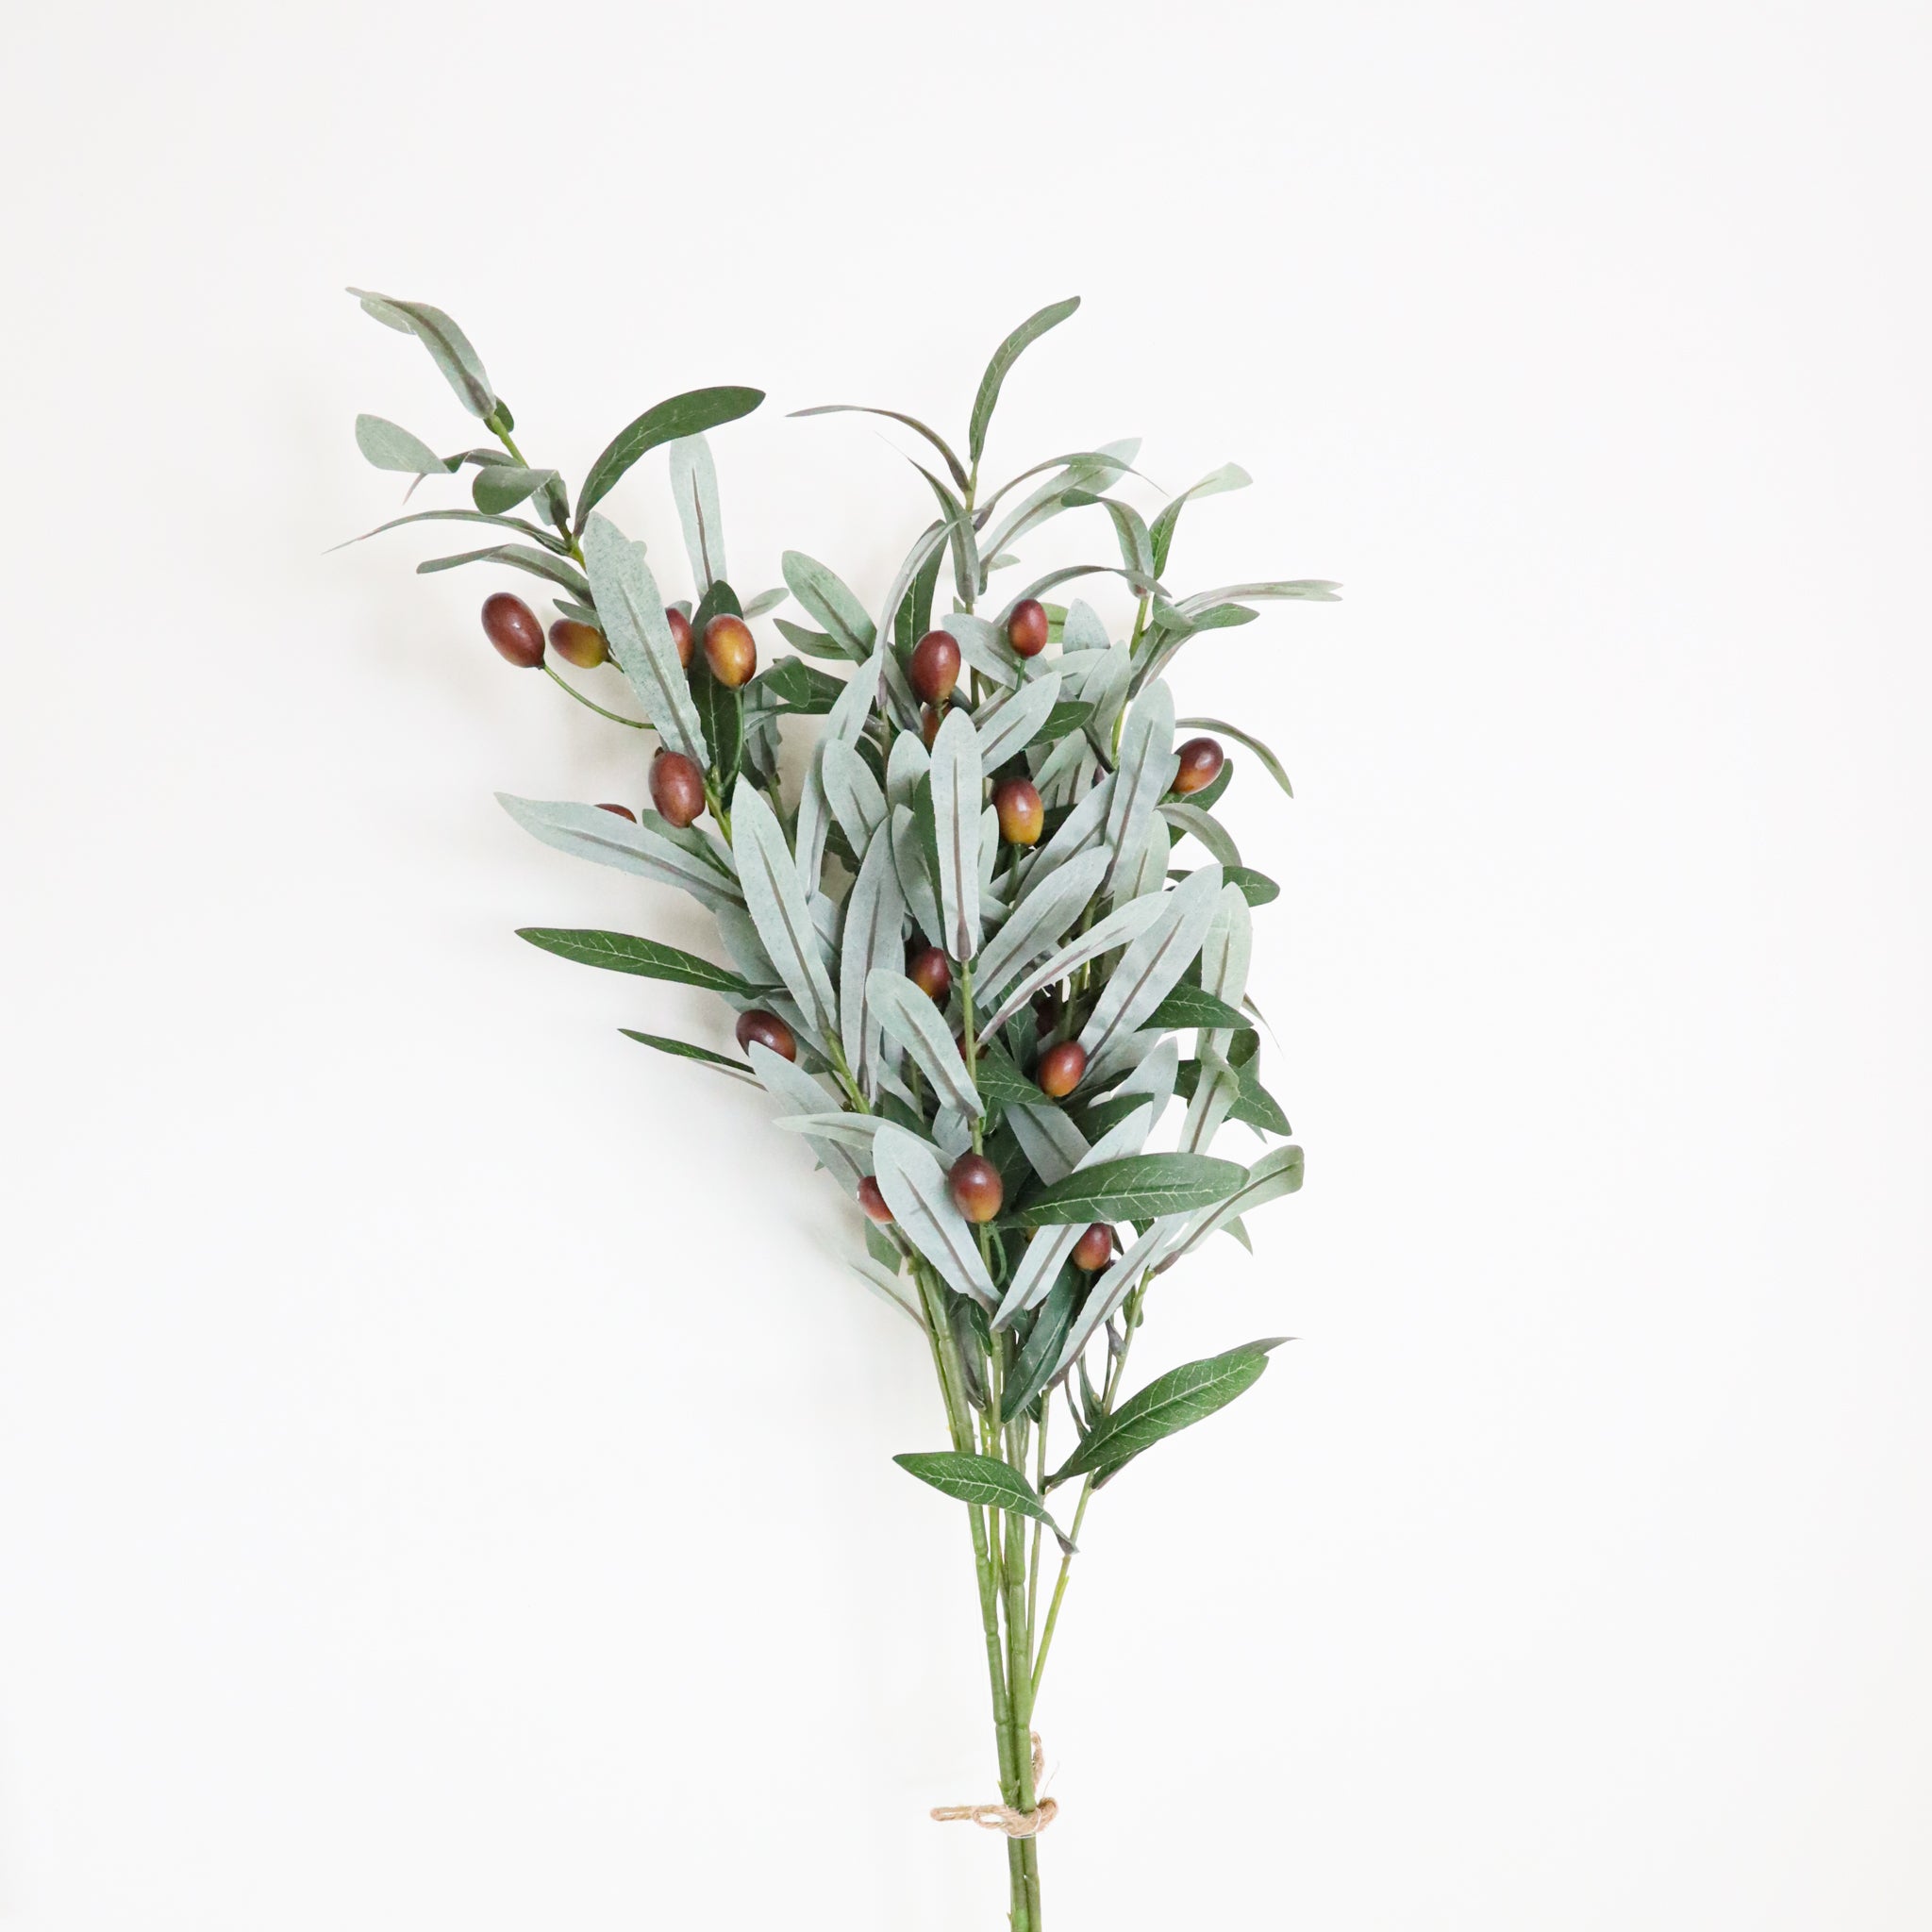 Valley Artificial Olive Stem Bouquet 30'' X 12'' (Set Of 3)